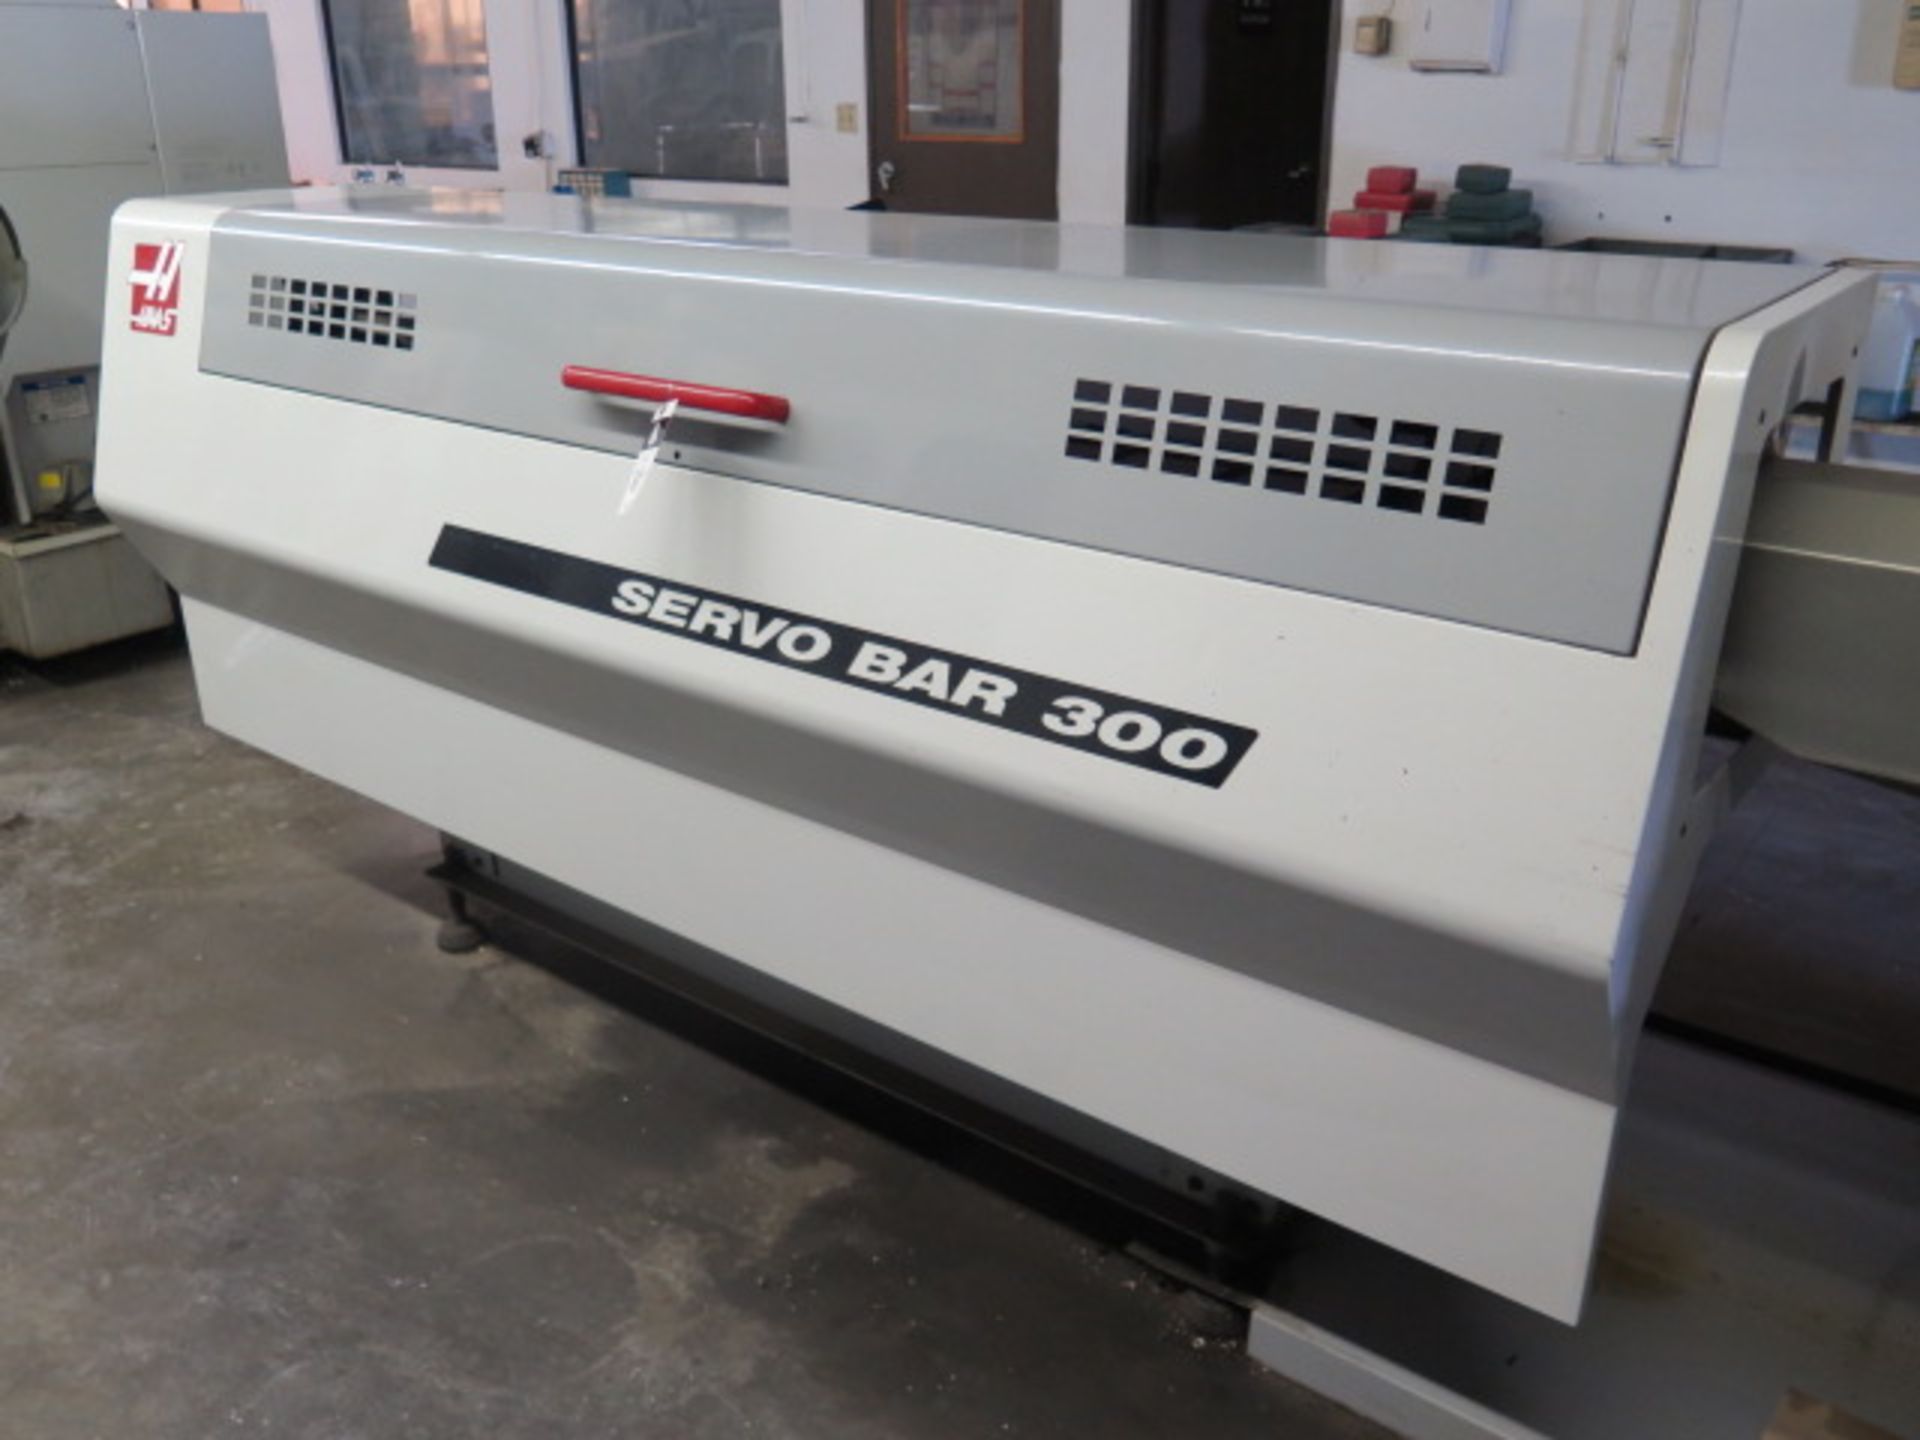 Haas Servobar 300 Automatic Bar Loader / Feeder s/n 91279 (SOLD AS-IS - NO WARRANTY) - Image 2 of 9